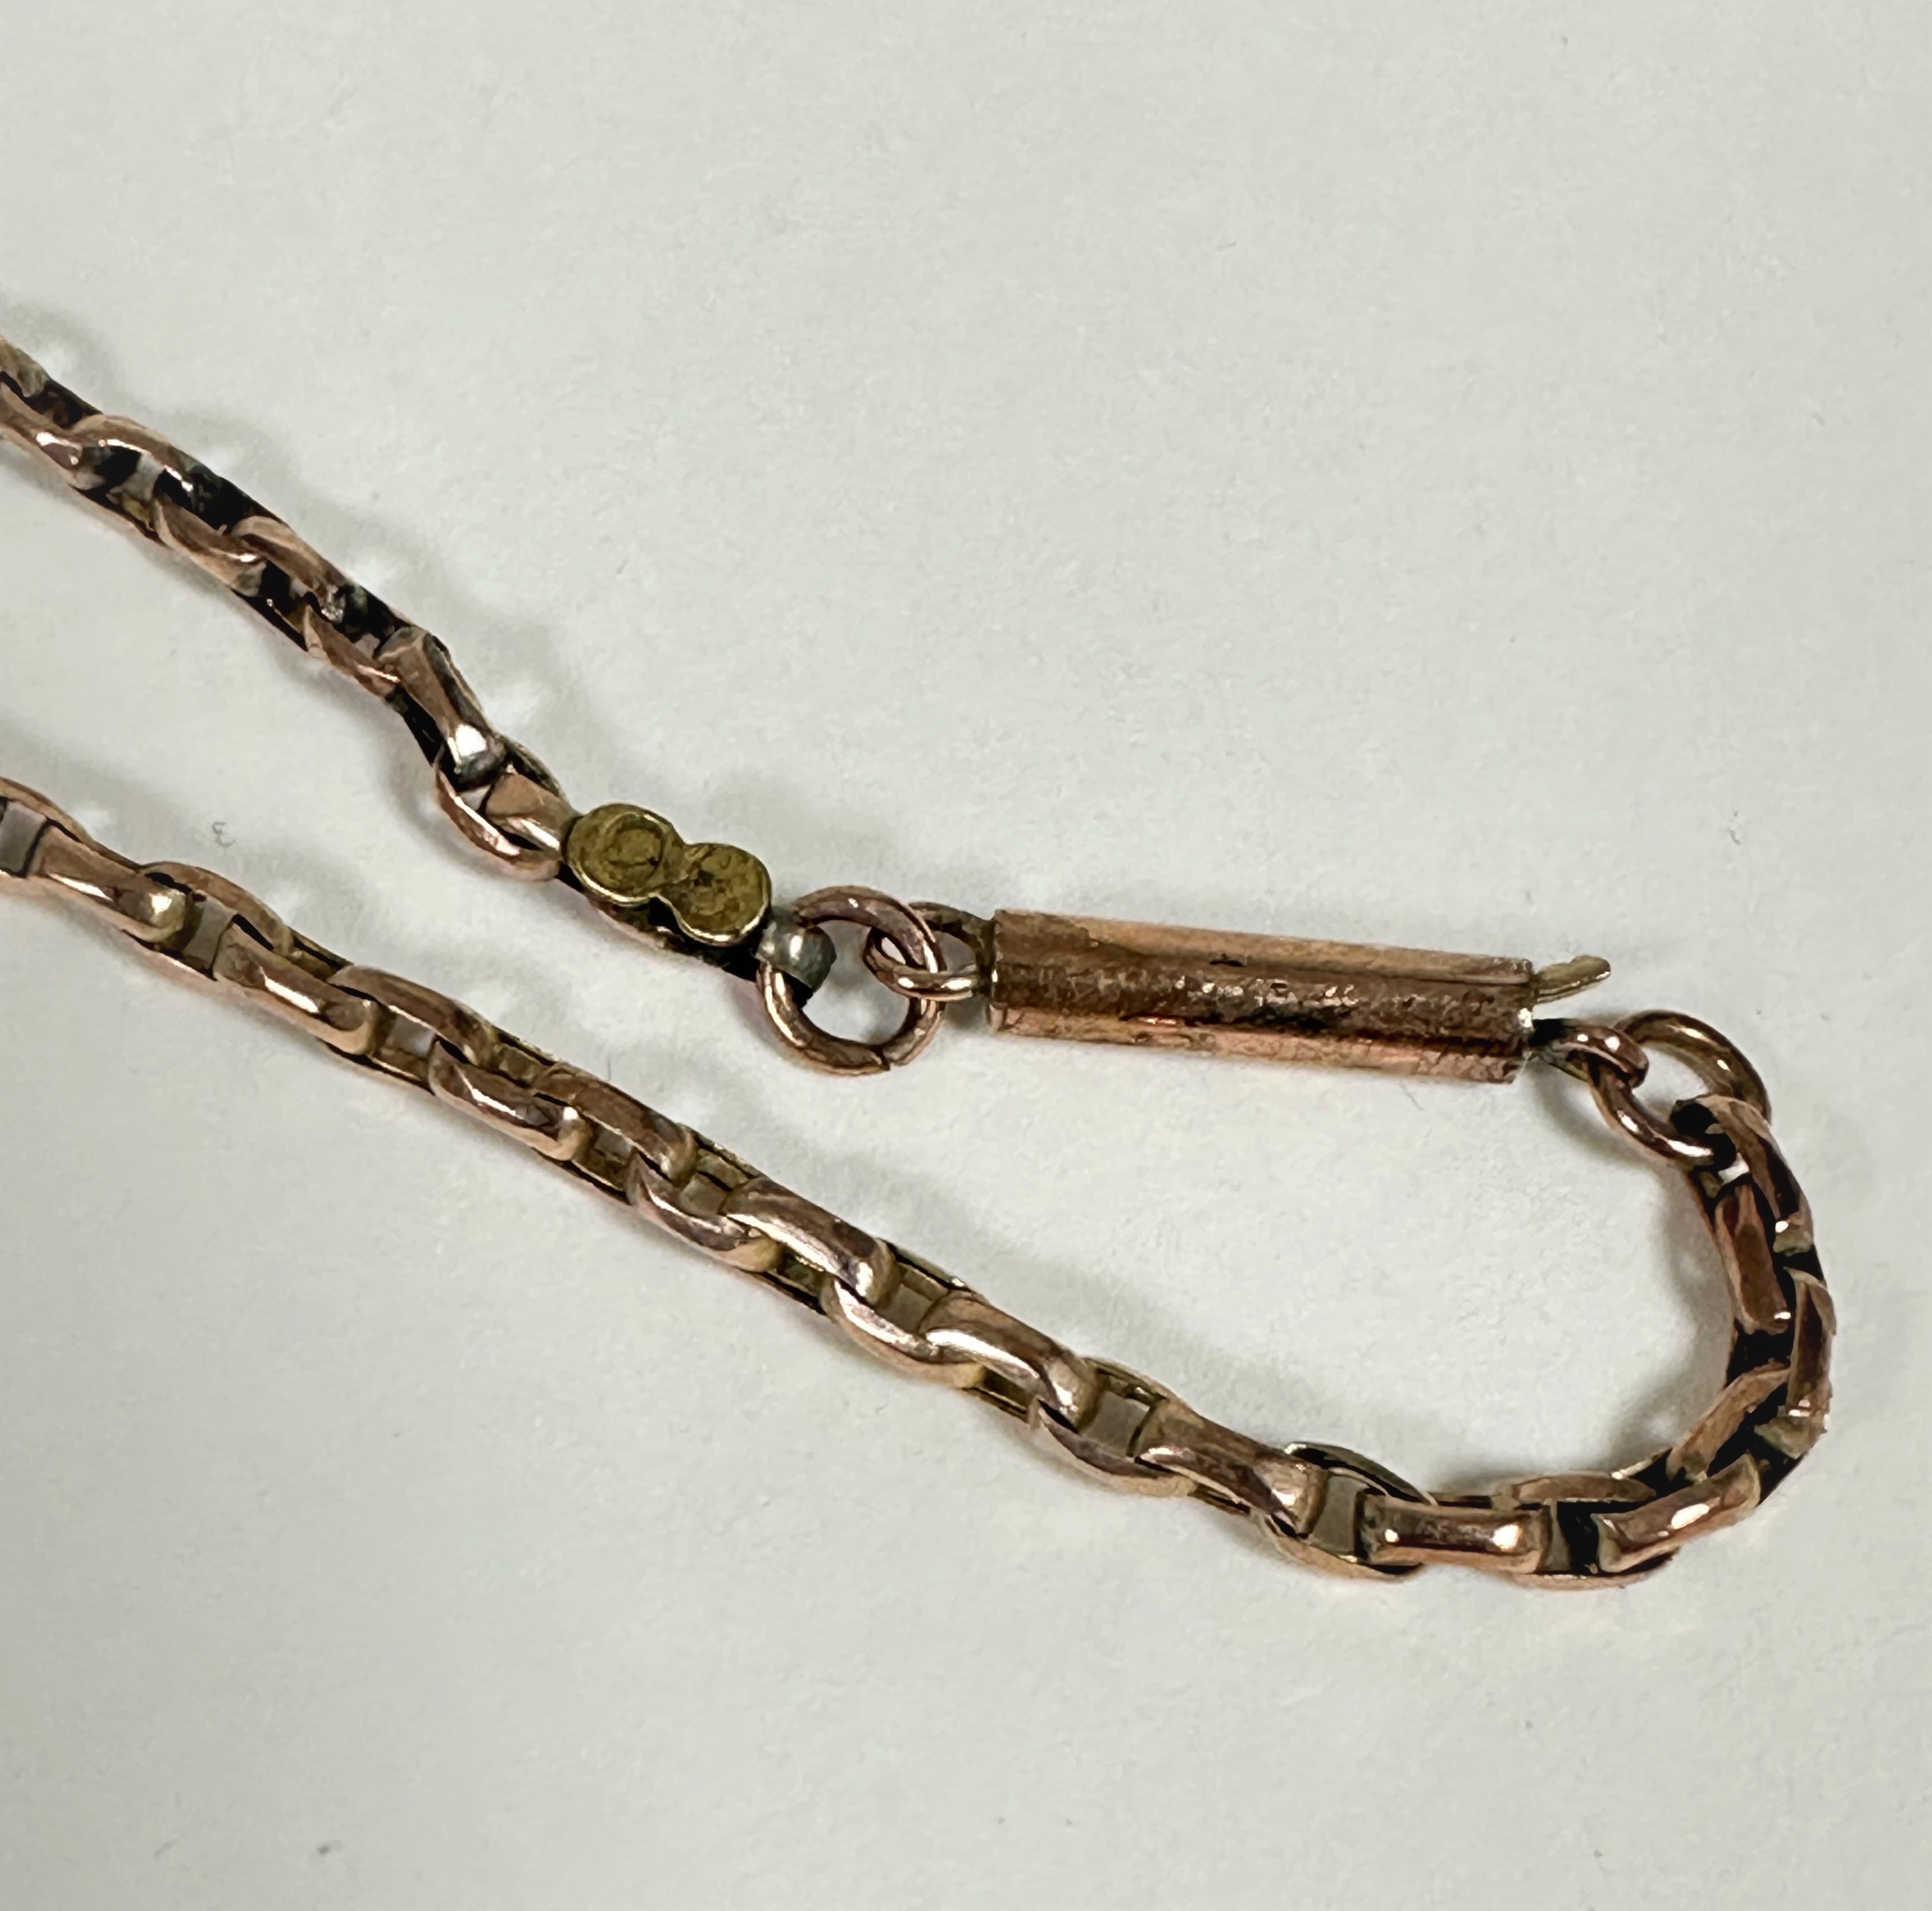 A 9ct gold belcher link necklace with barrel clasp fastening (21cm) (5.34g) - Image 2 of 2